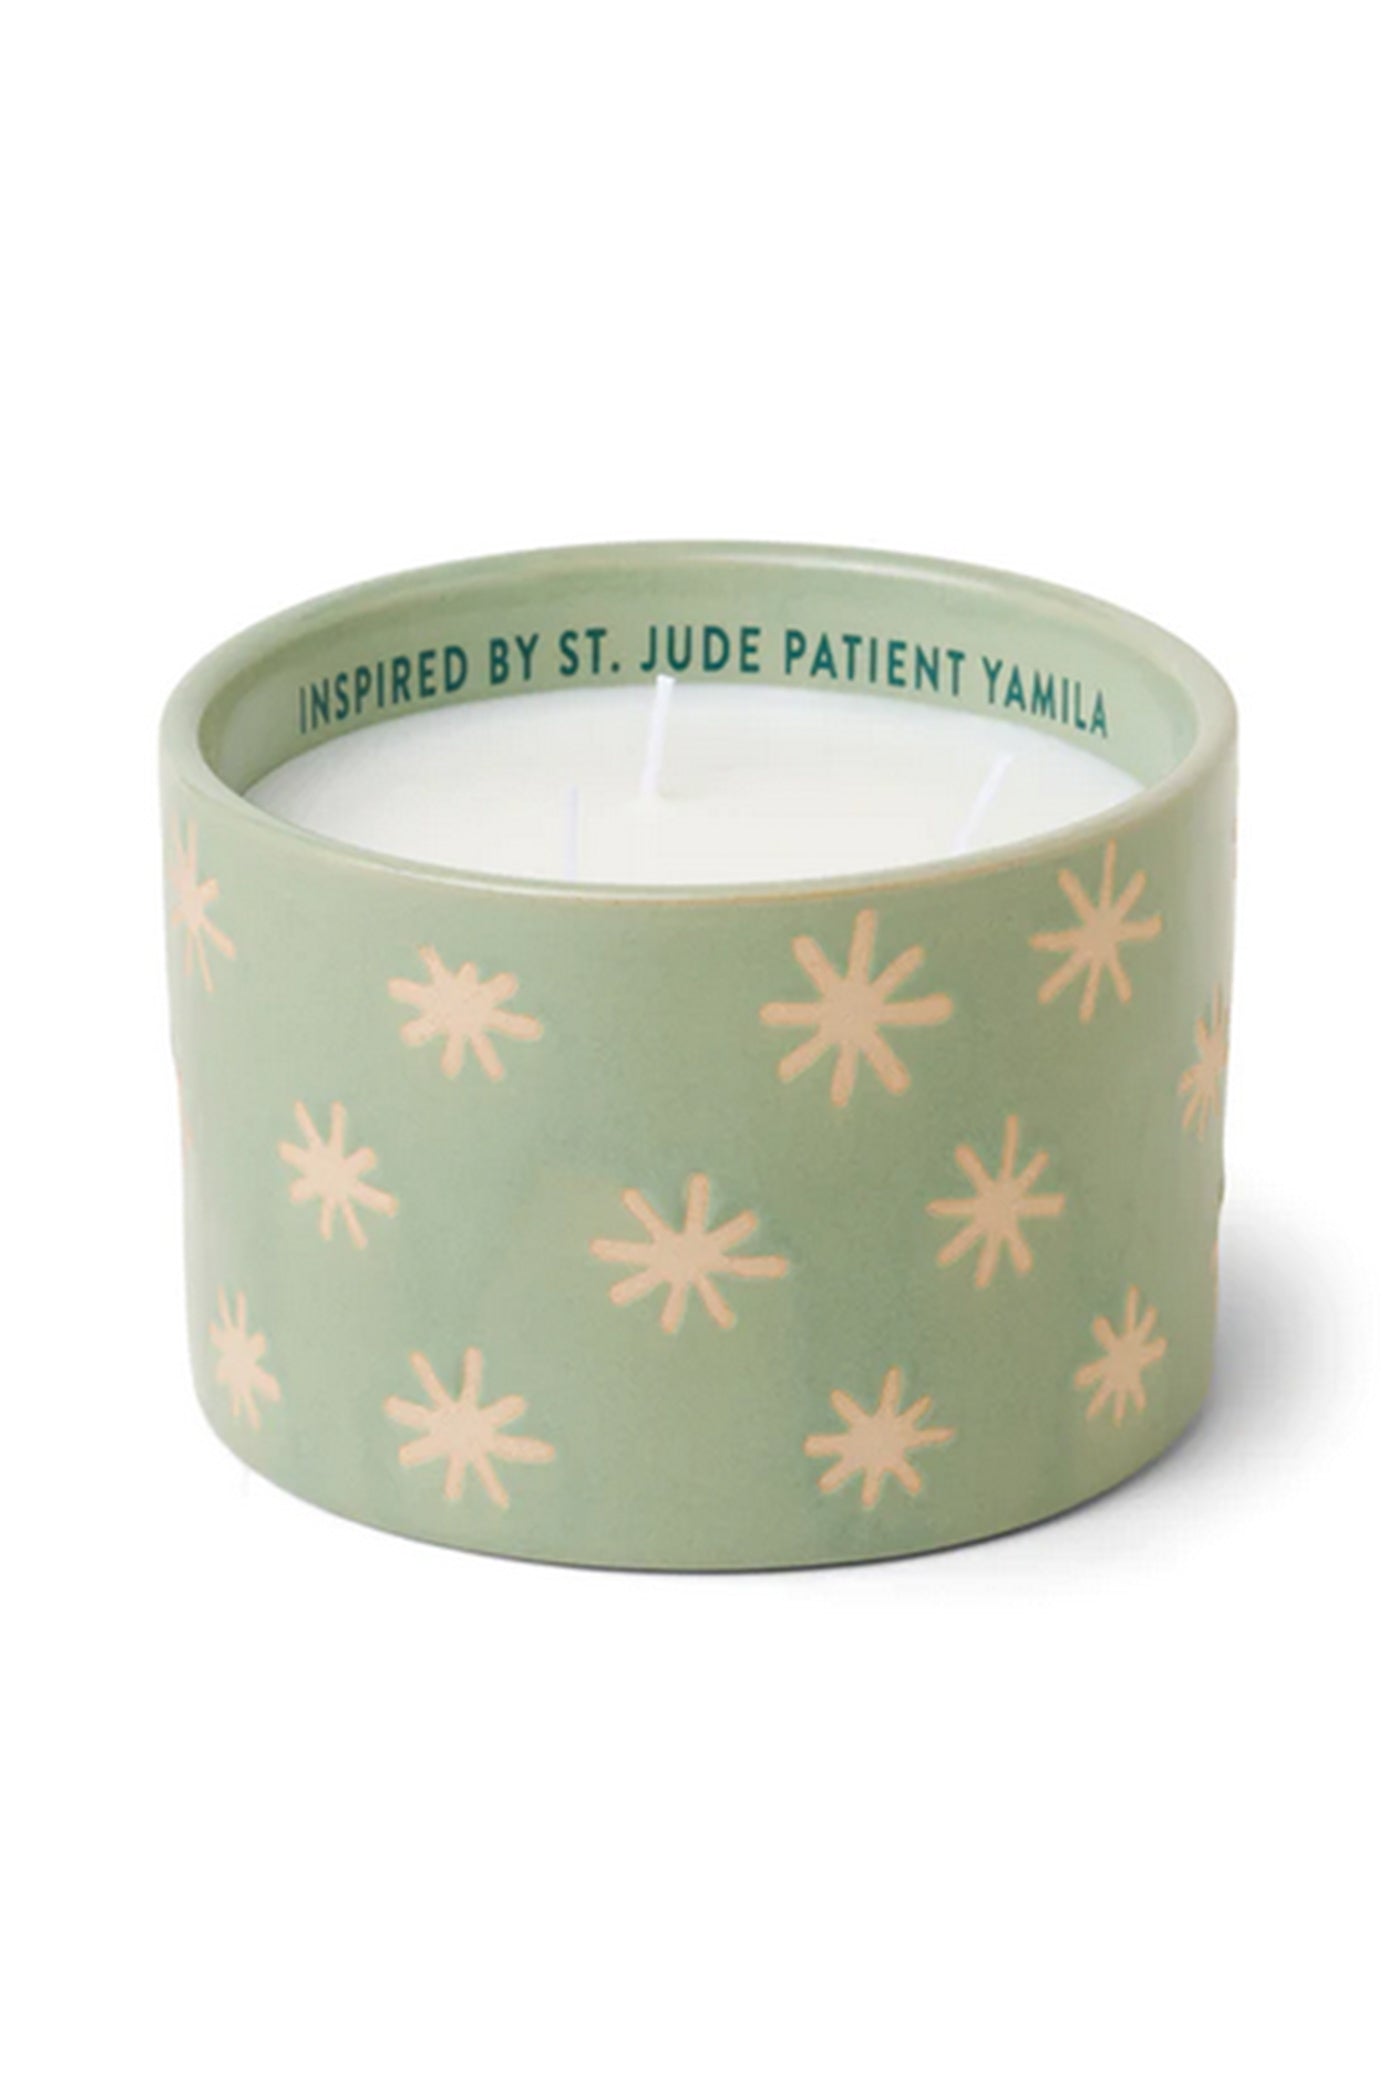 St. Jude Giveback "Inspire" 11 oz. Candle - Mist + Mint by Paddywax